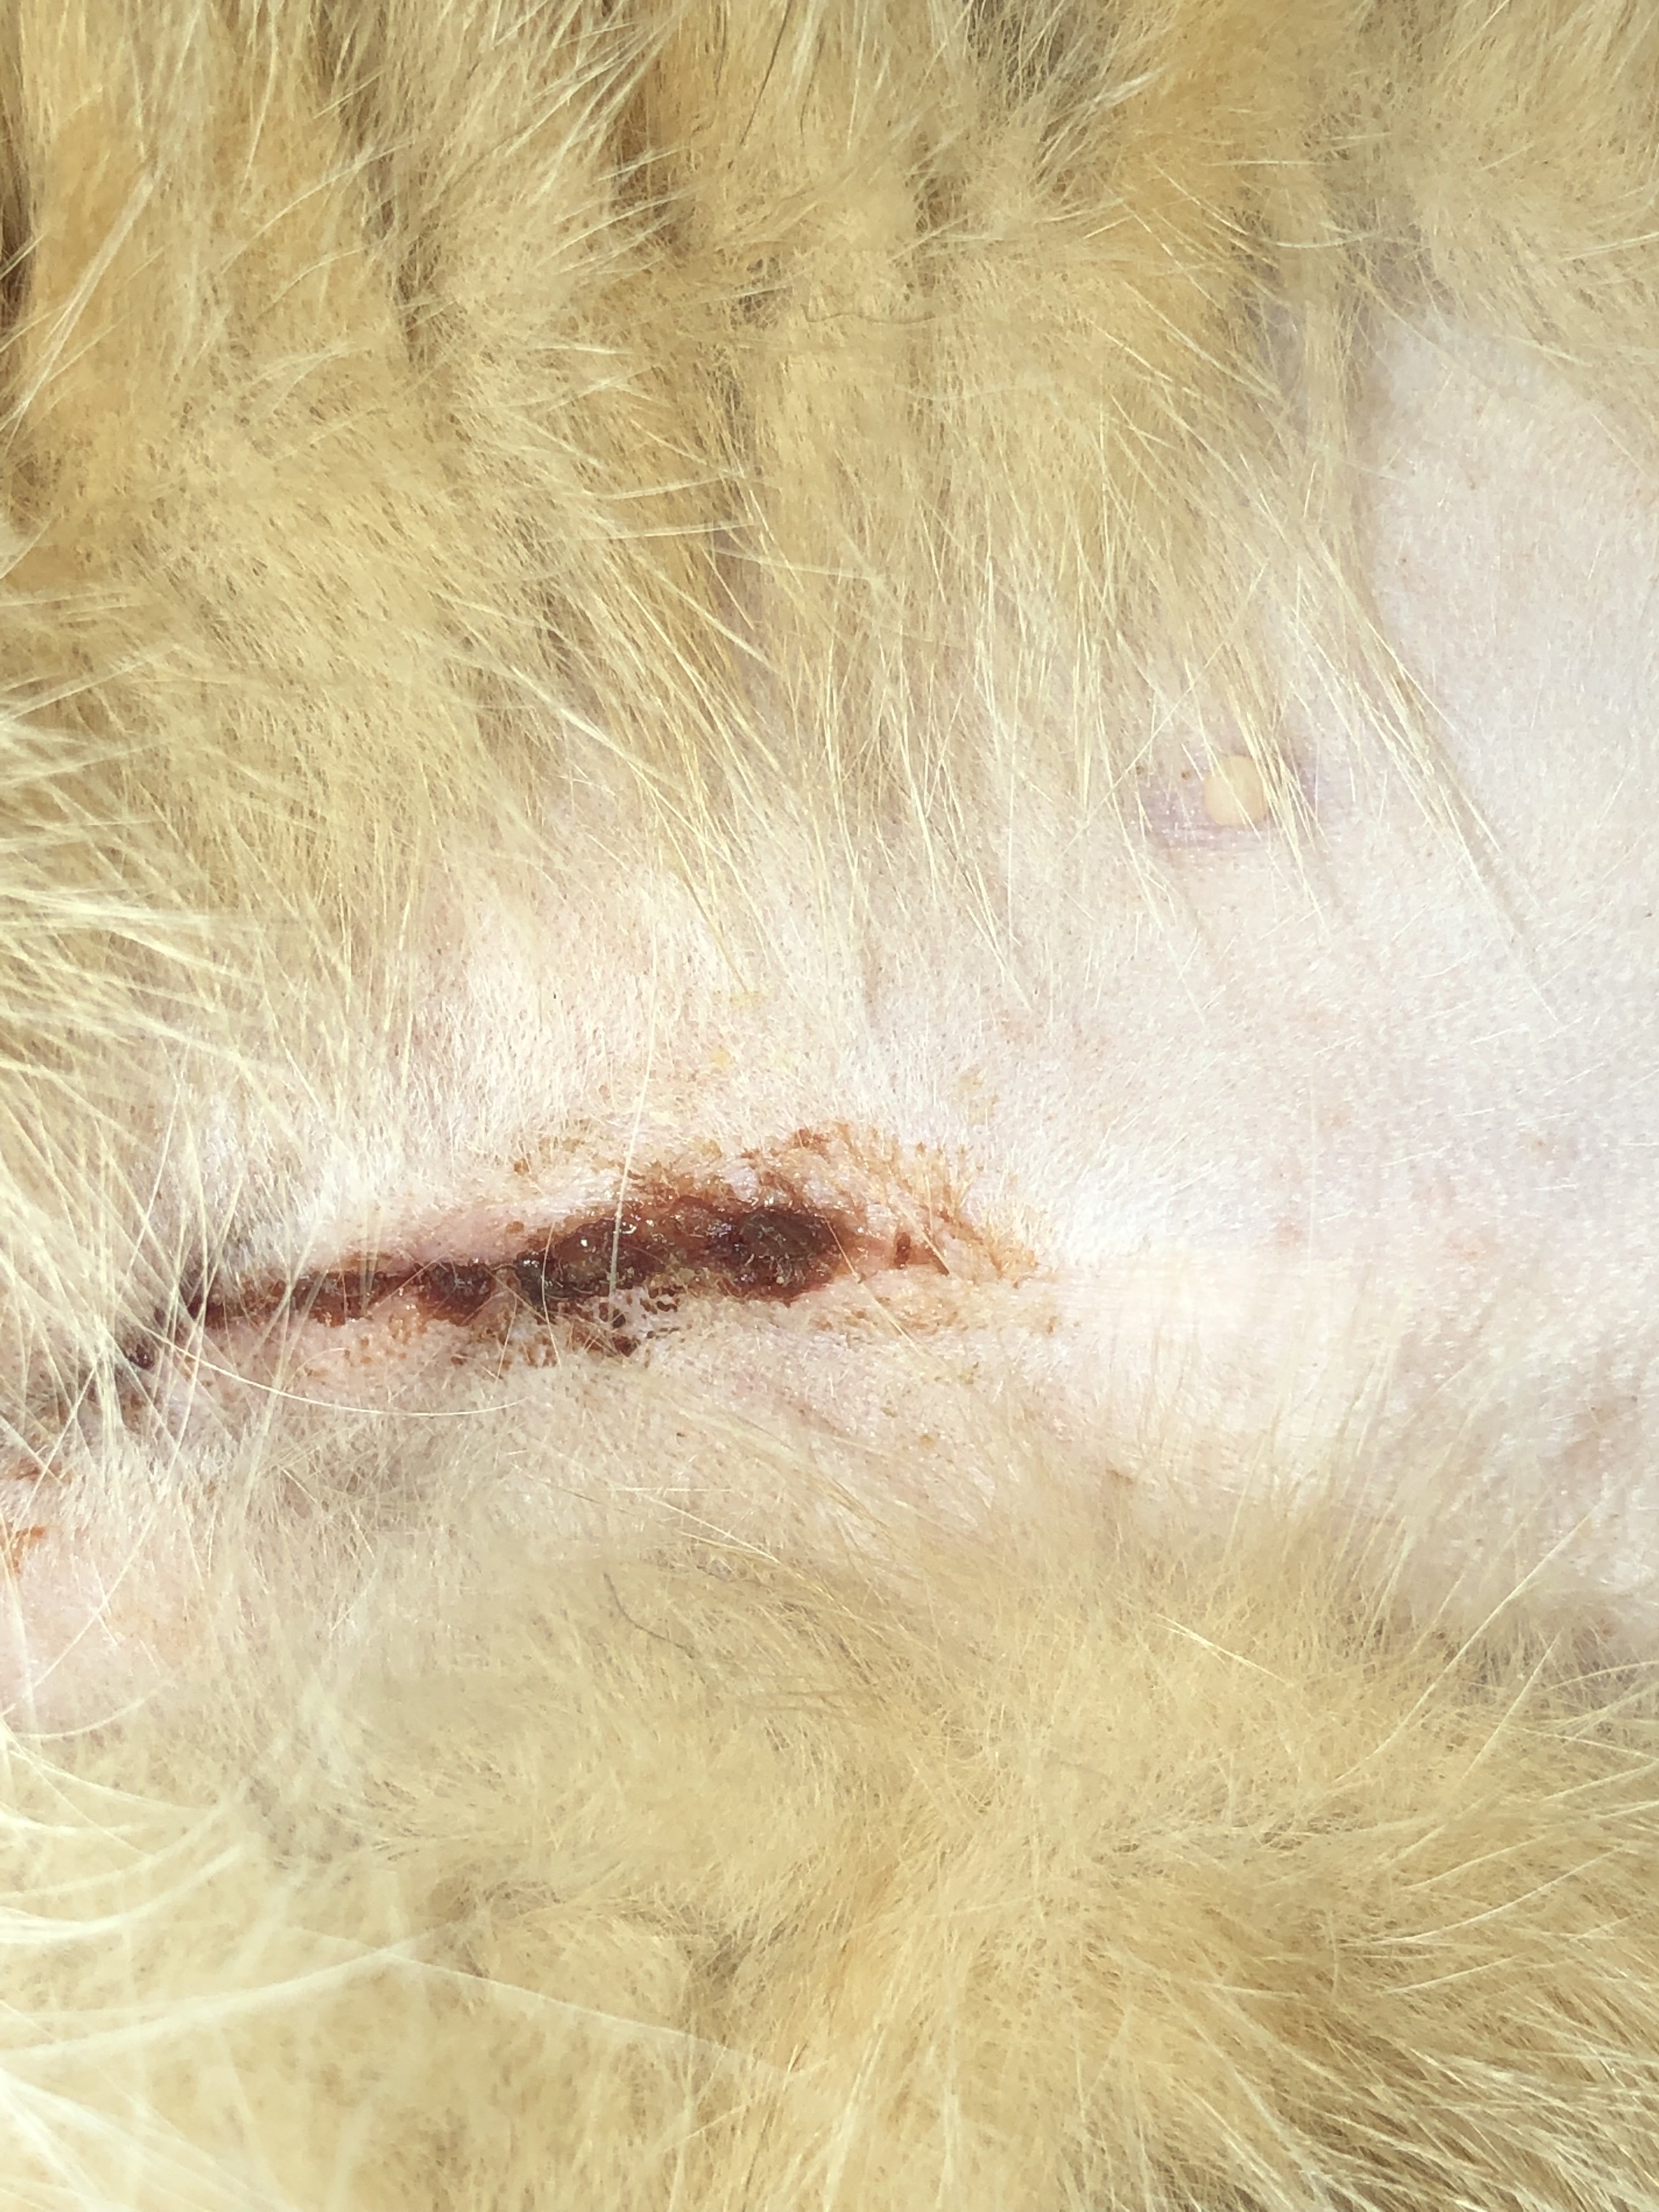 Opinions On Spay Incision? TheCatSite